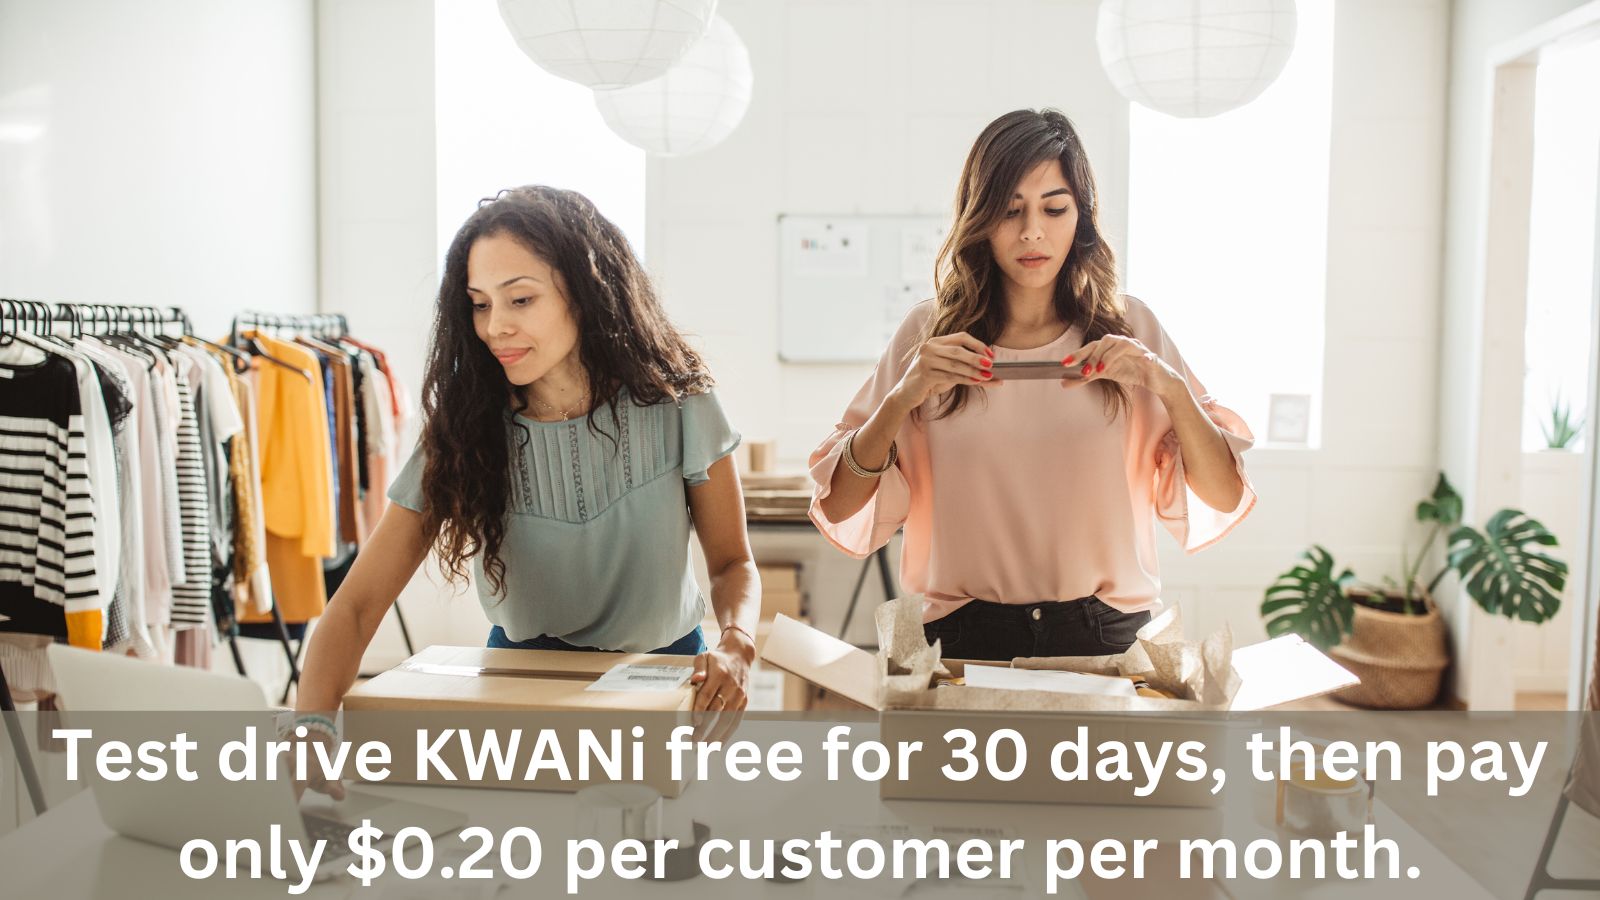 Test drive KWANi for 30 days then pay $0.20 per customer a month